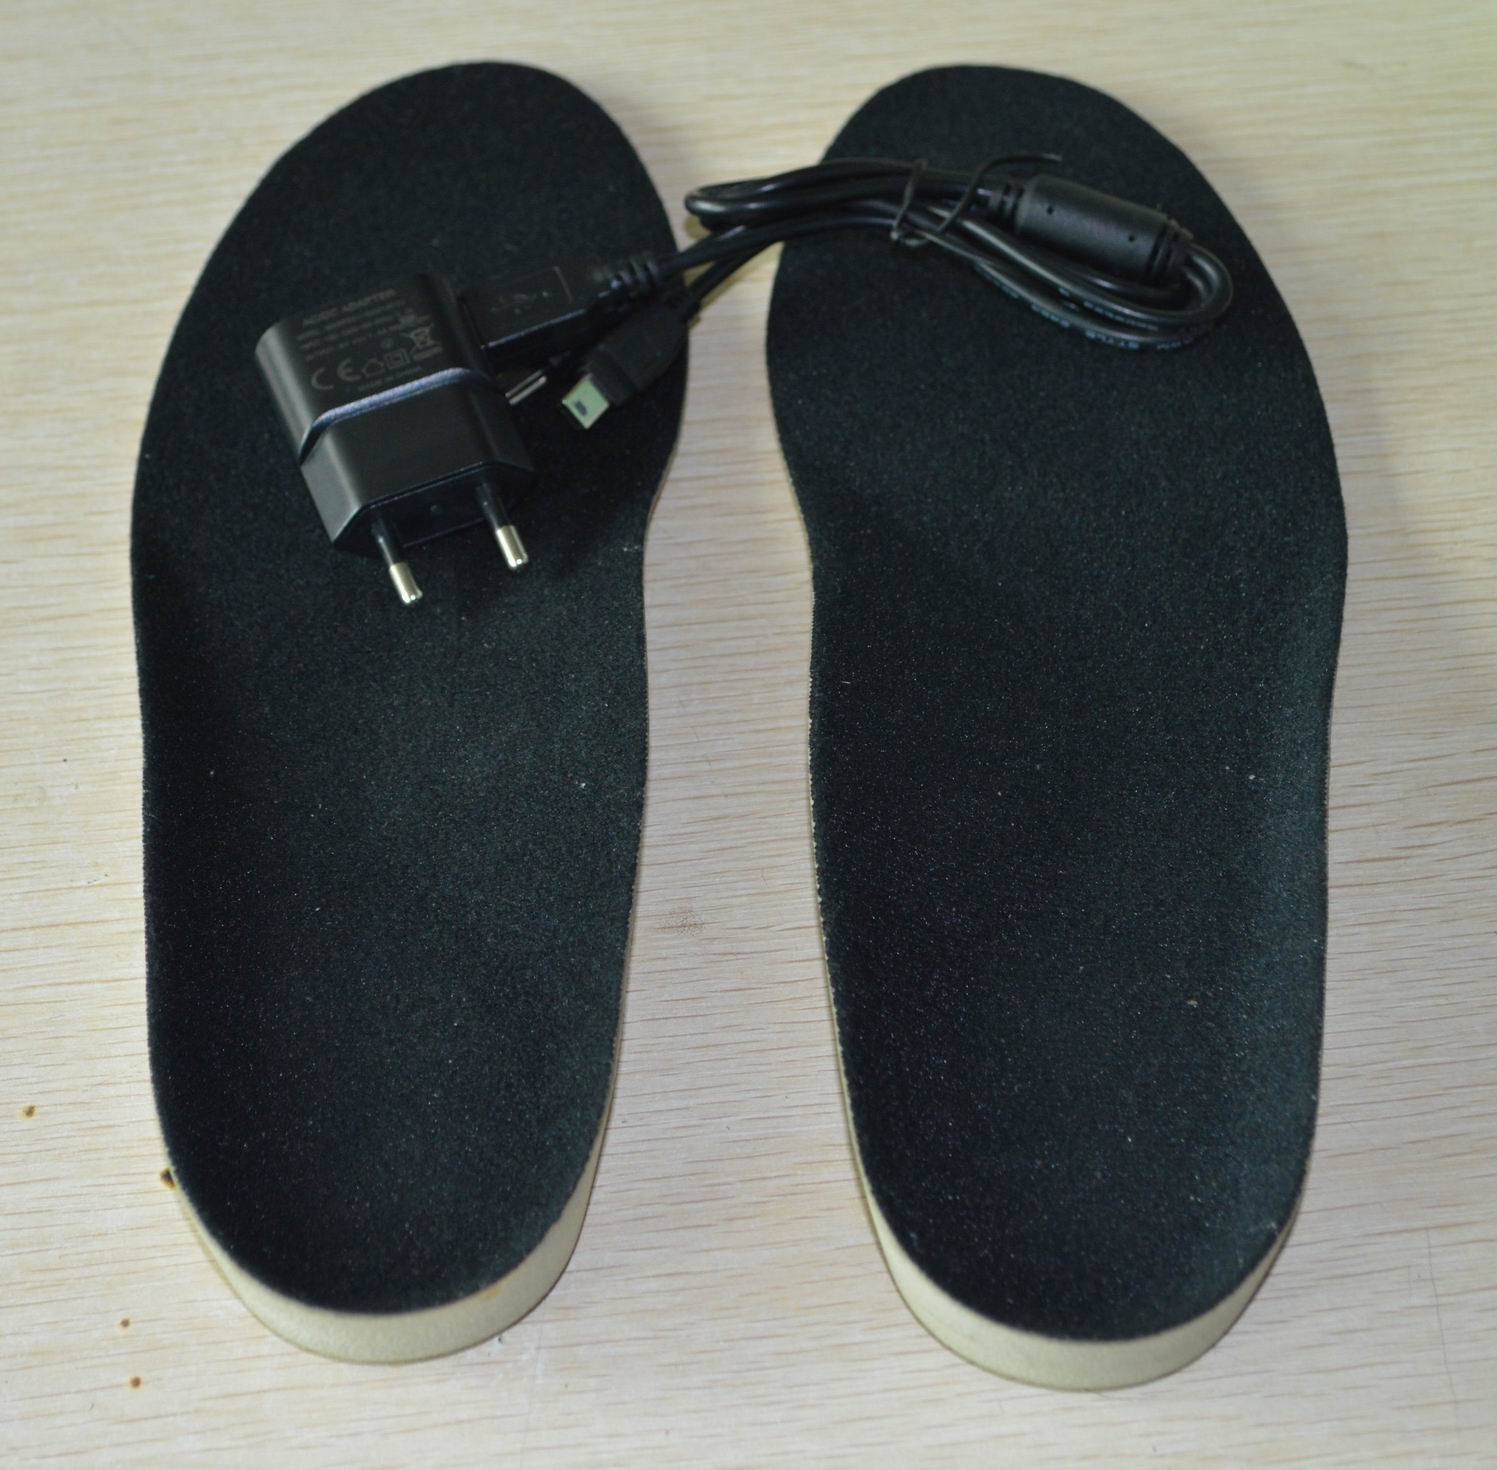 Li-ion Battery Rechargeable Heated Insoles for The Winter